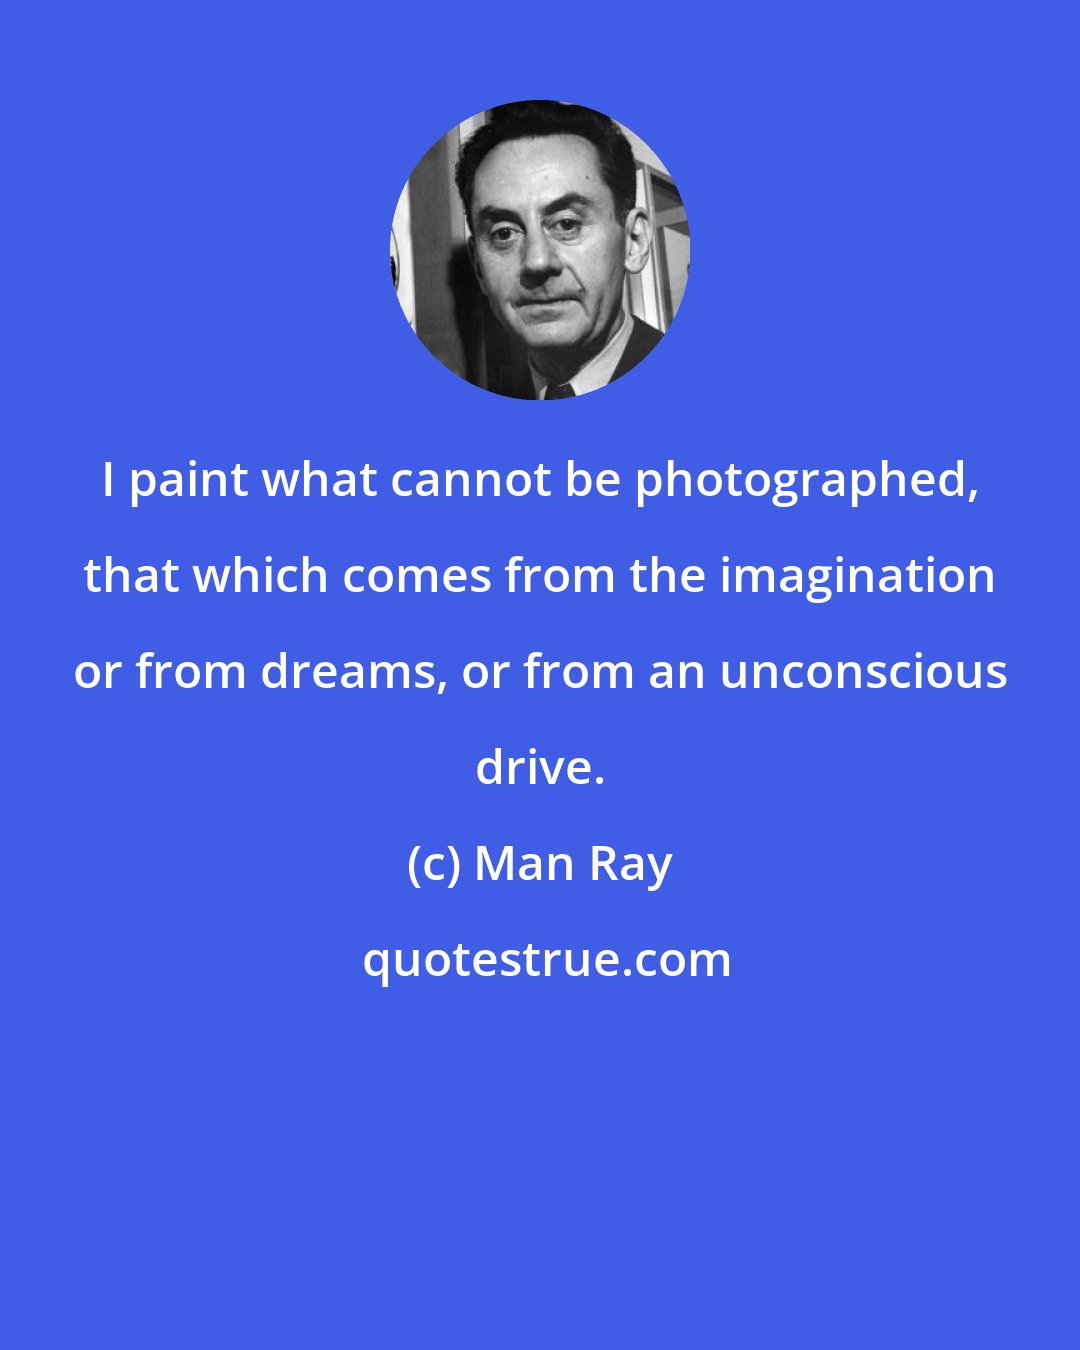 Man Ray: I paint what cannot be photographed, that which comes from the imagination or from dreams, or from an unconscious drive.